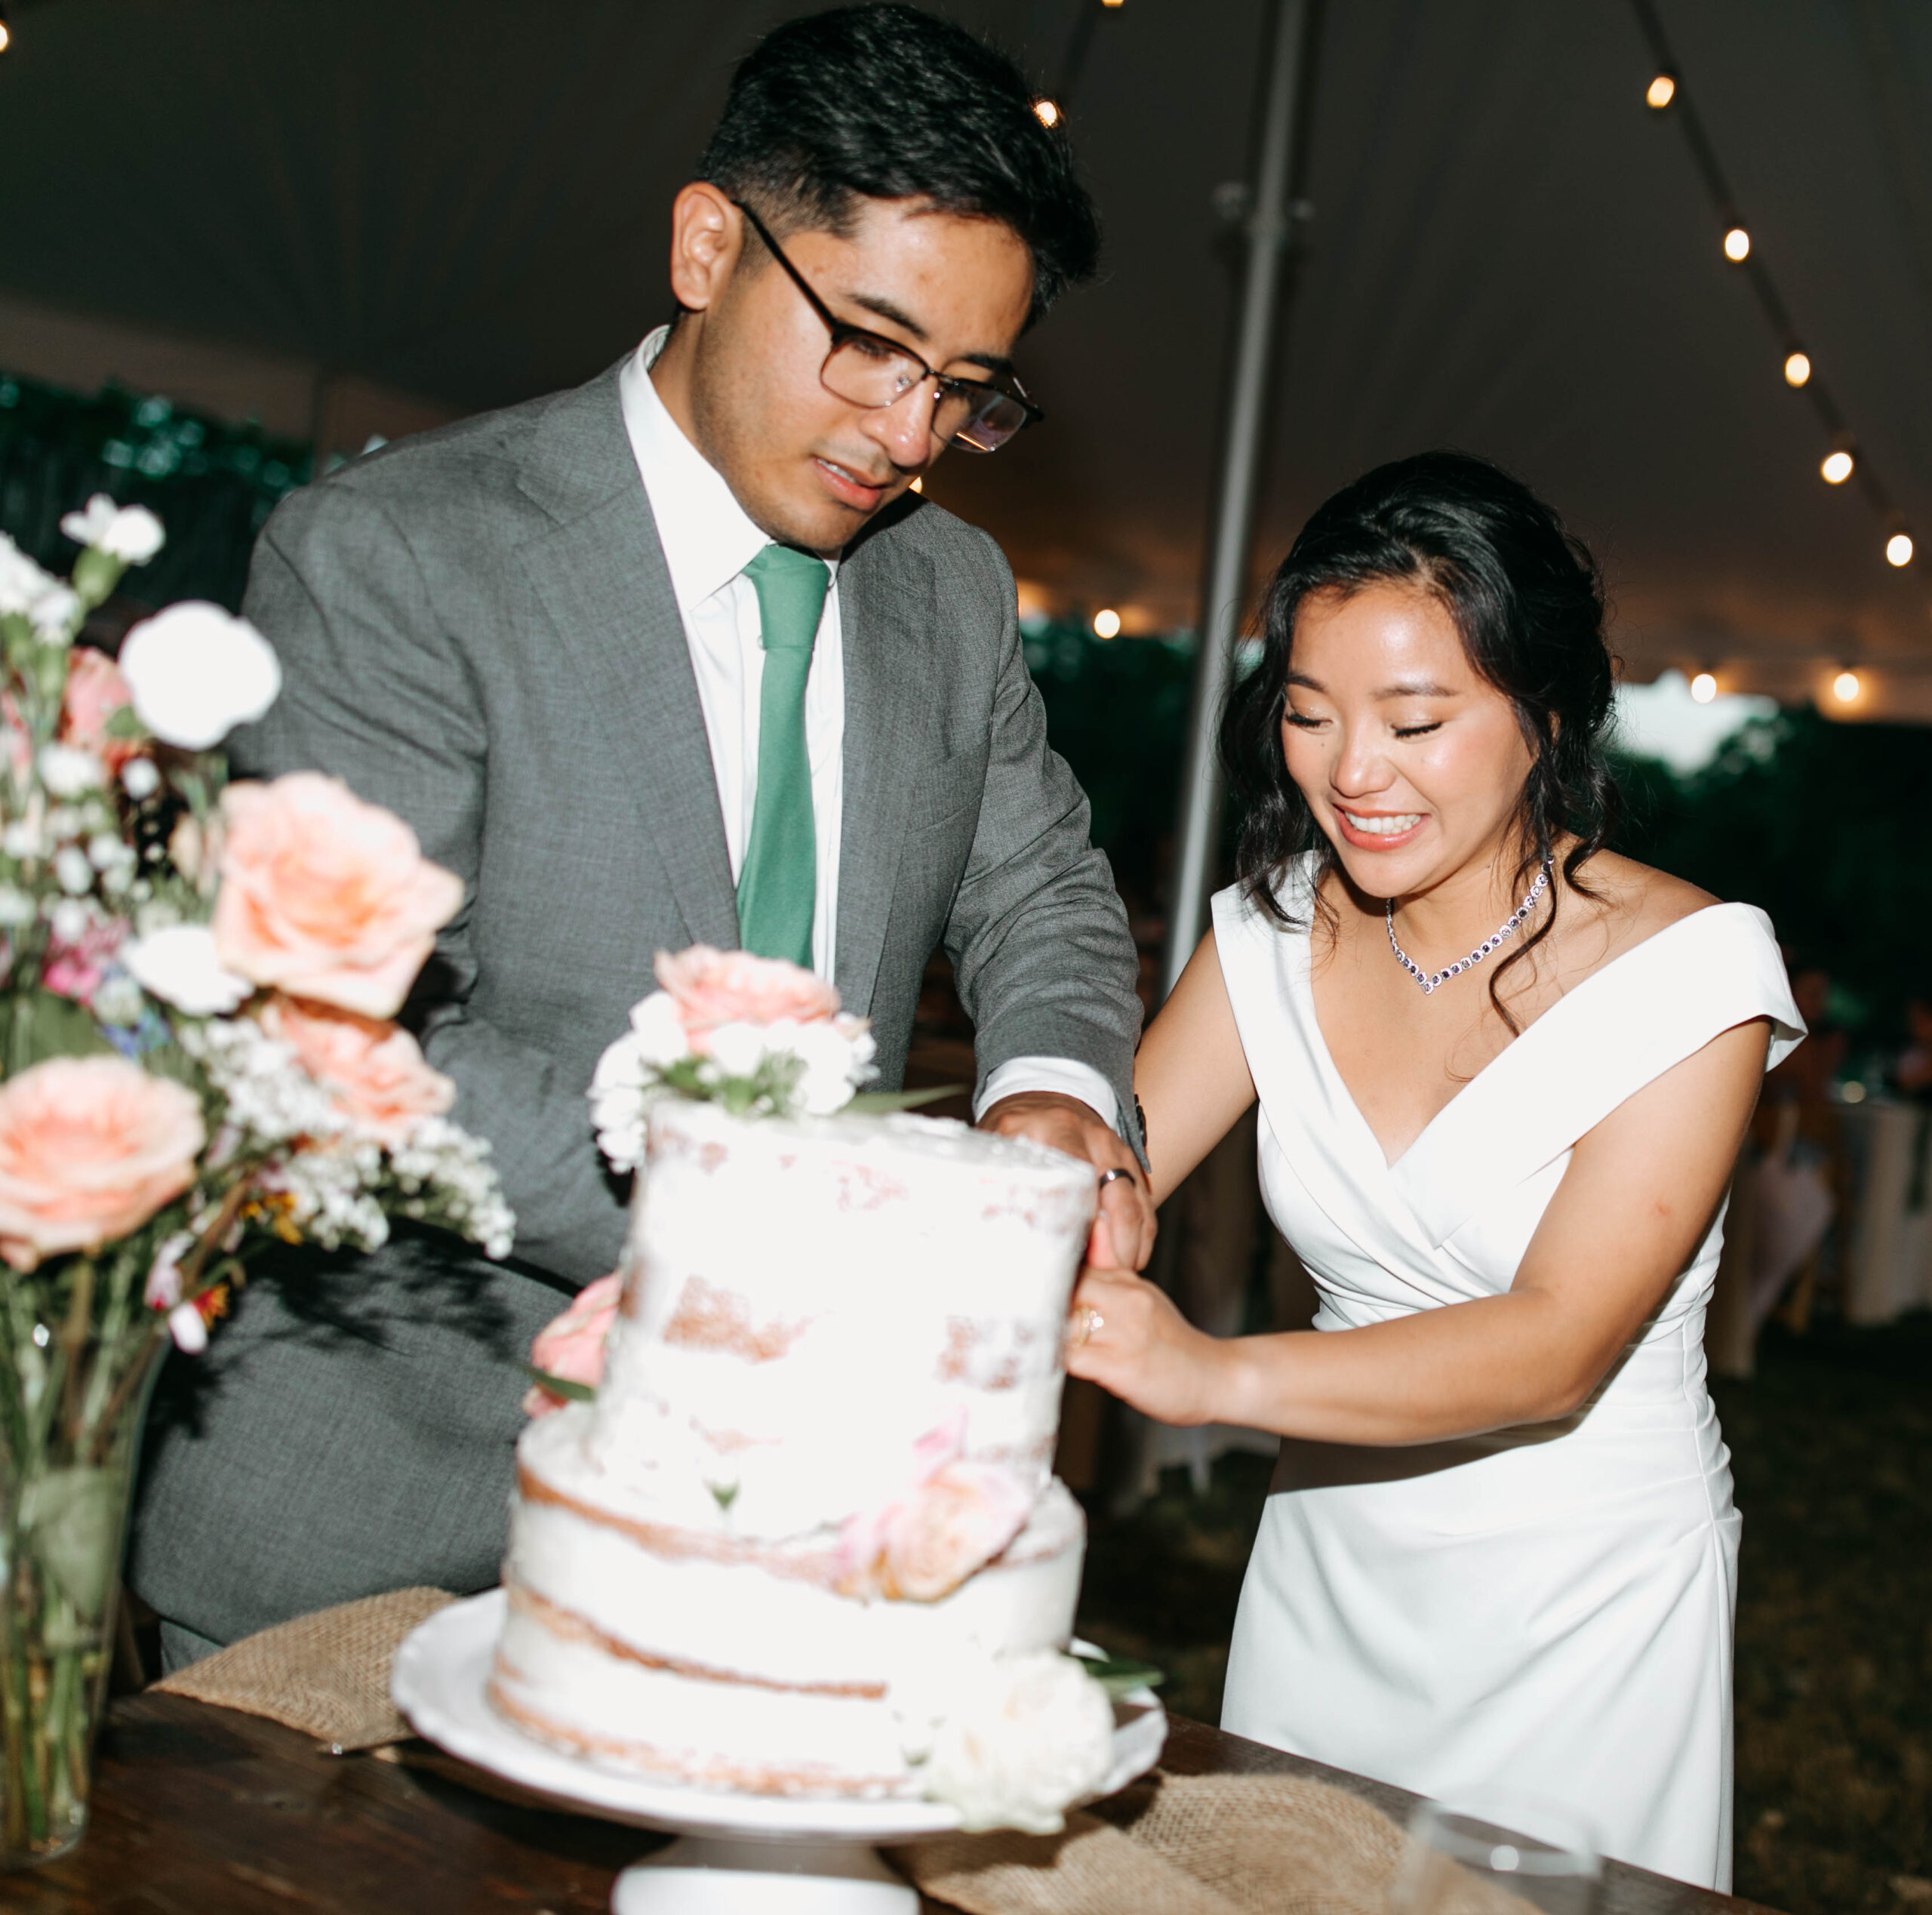 Austin wedding couple Joyce and Isaac cutting their naked cake at their reception.  